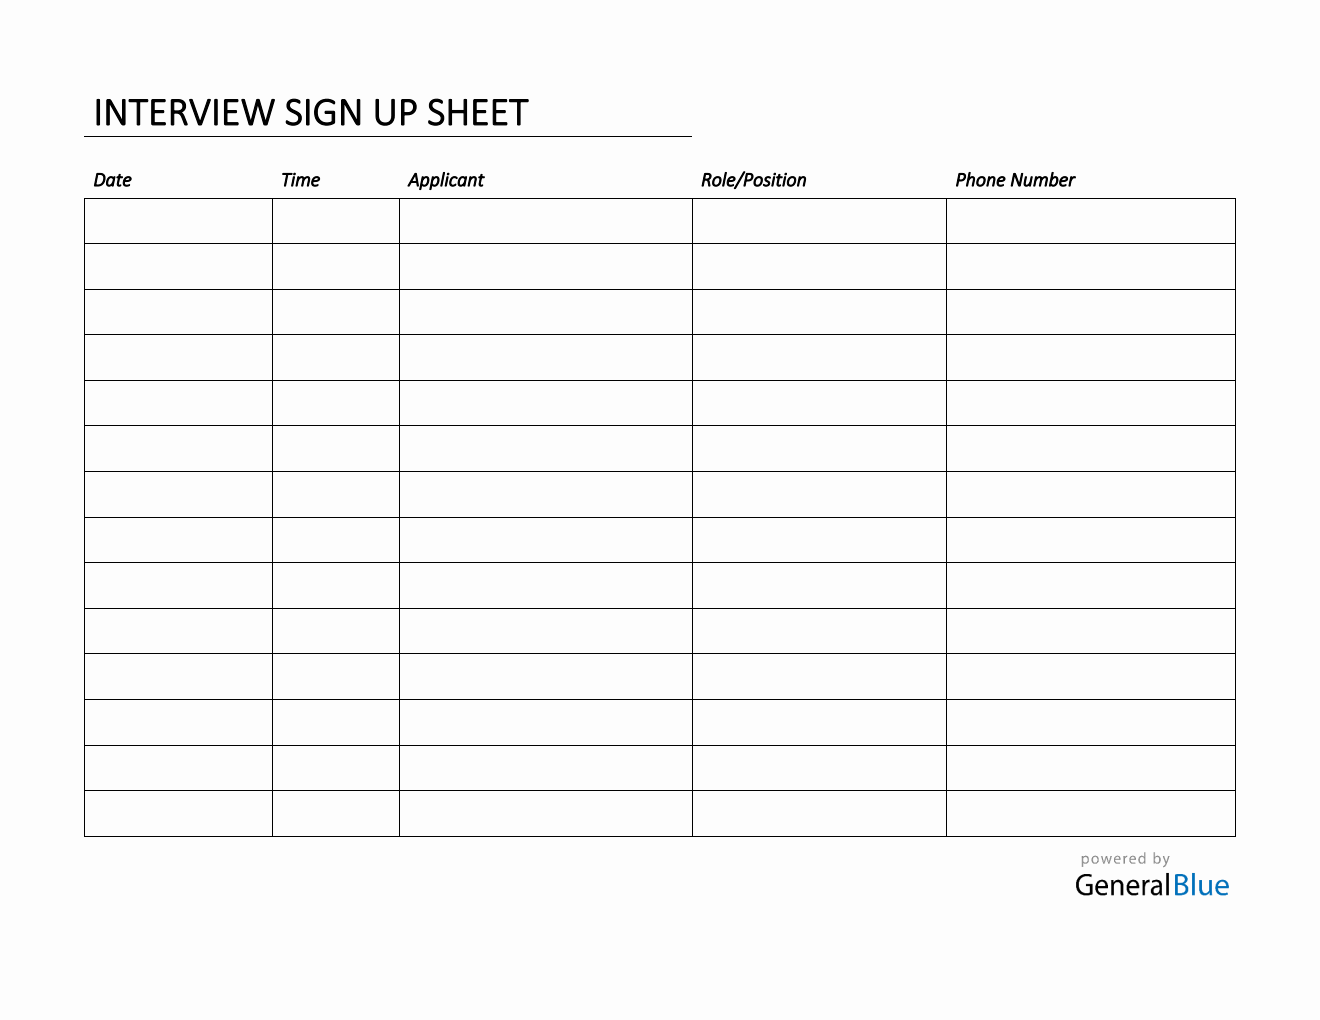 Interview Sign Up Sheet Template in Word (Simple)